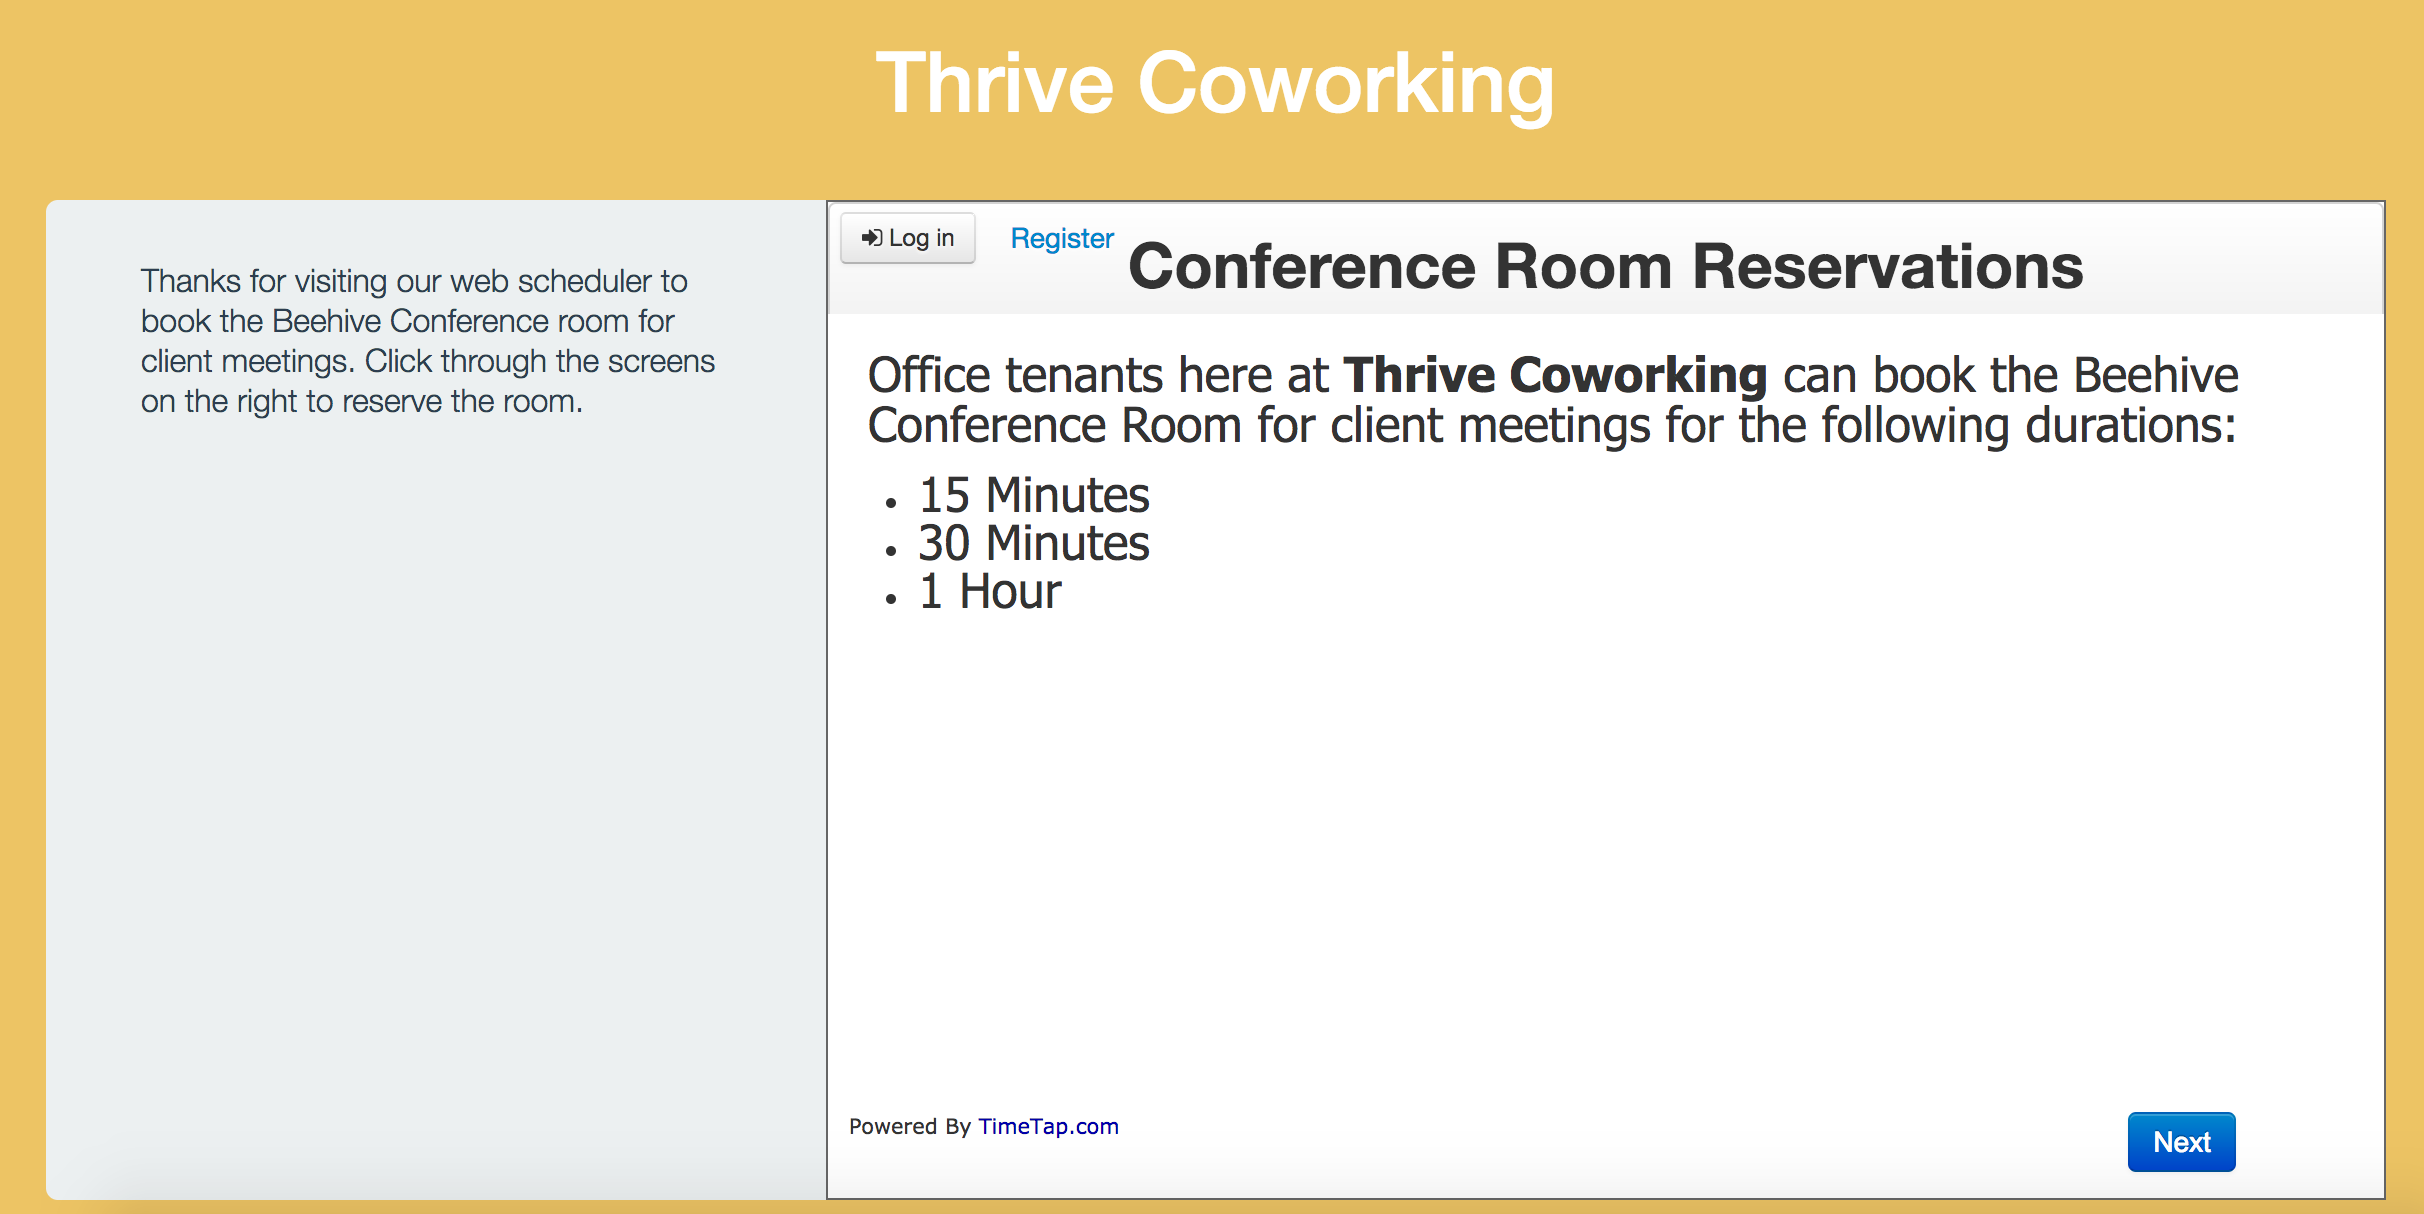 Conference Room Reservations Made Easy for Office Tenants - Here's How-9